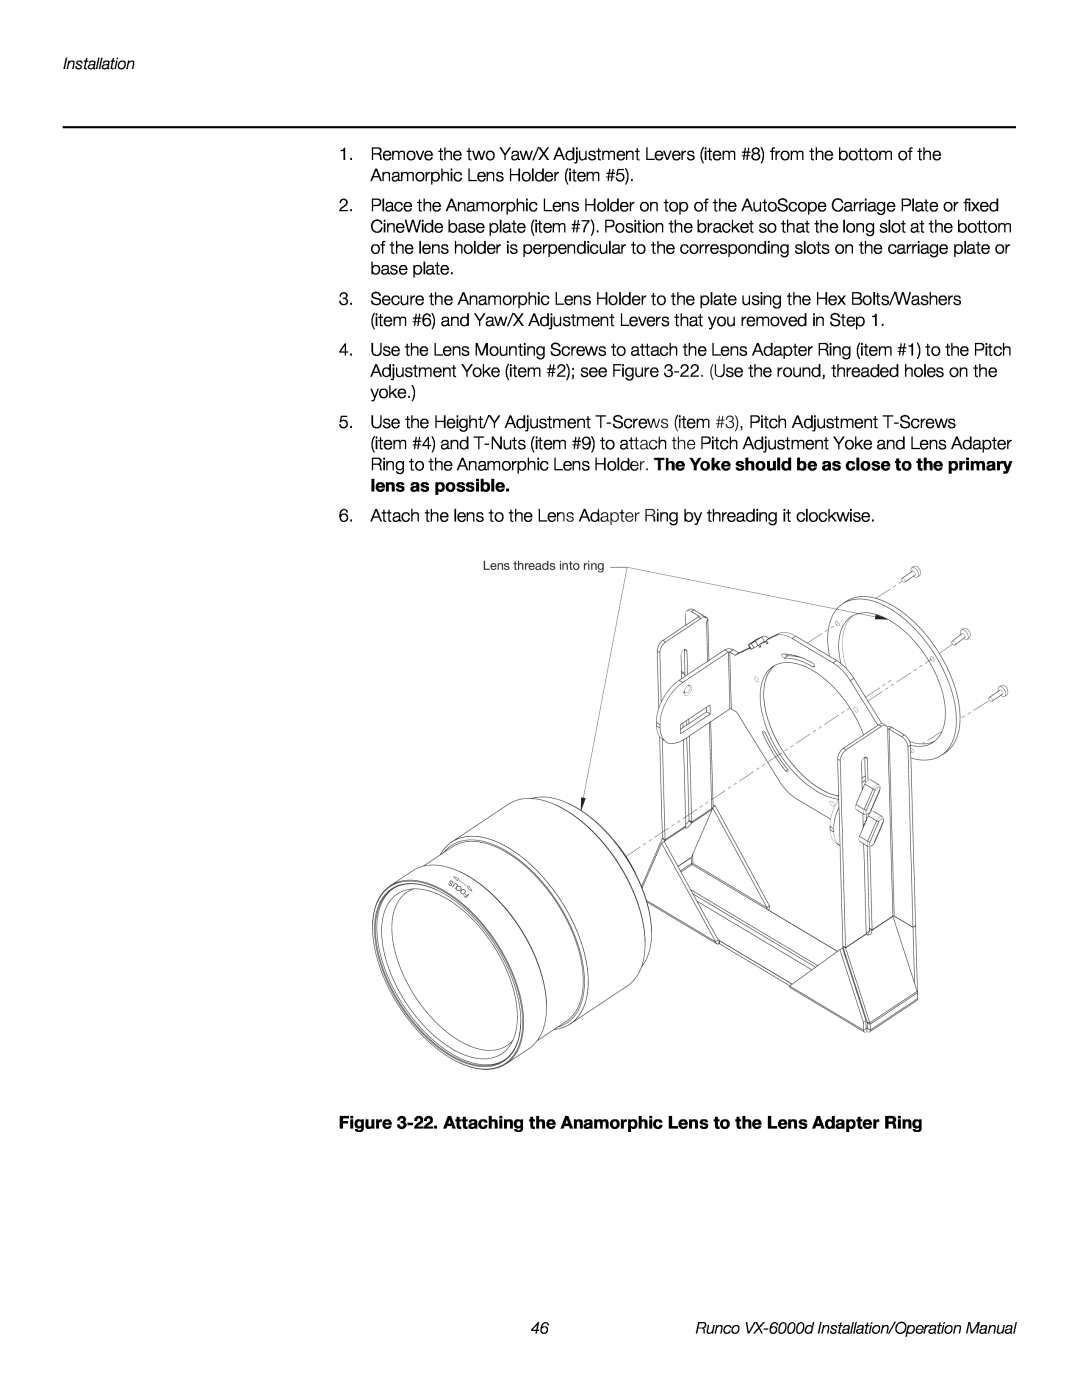 Runco VX-6000D operation manual 22. Attaching the Anamorphic Lens to the Lens Adapter Ring 